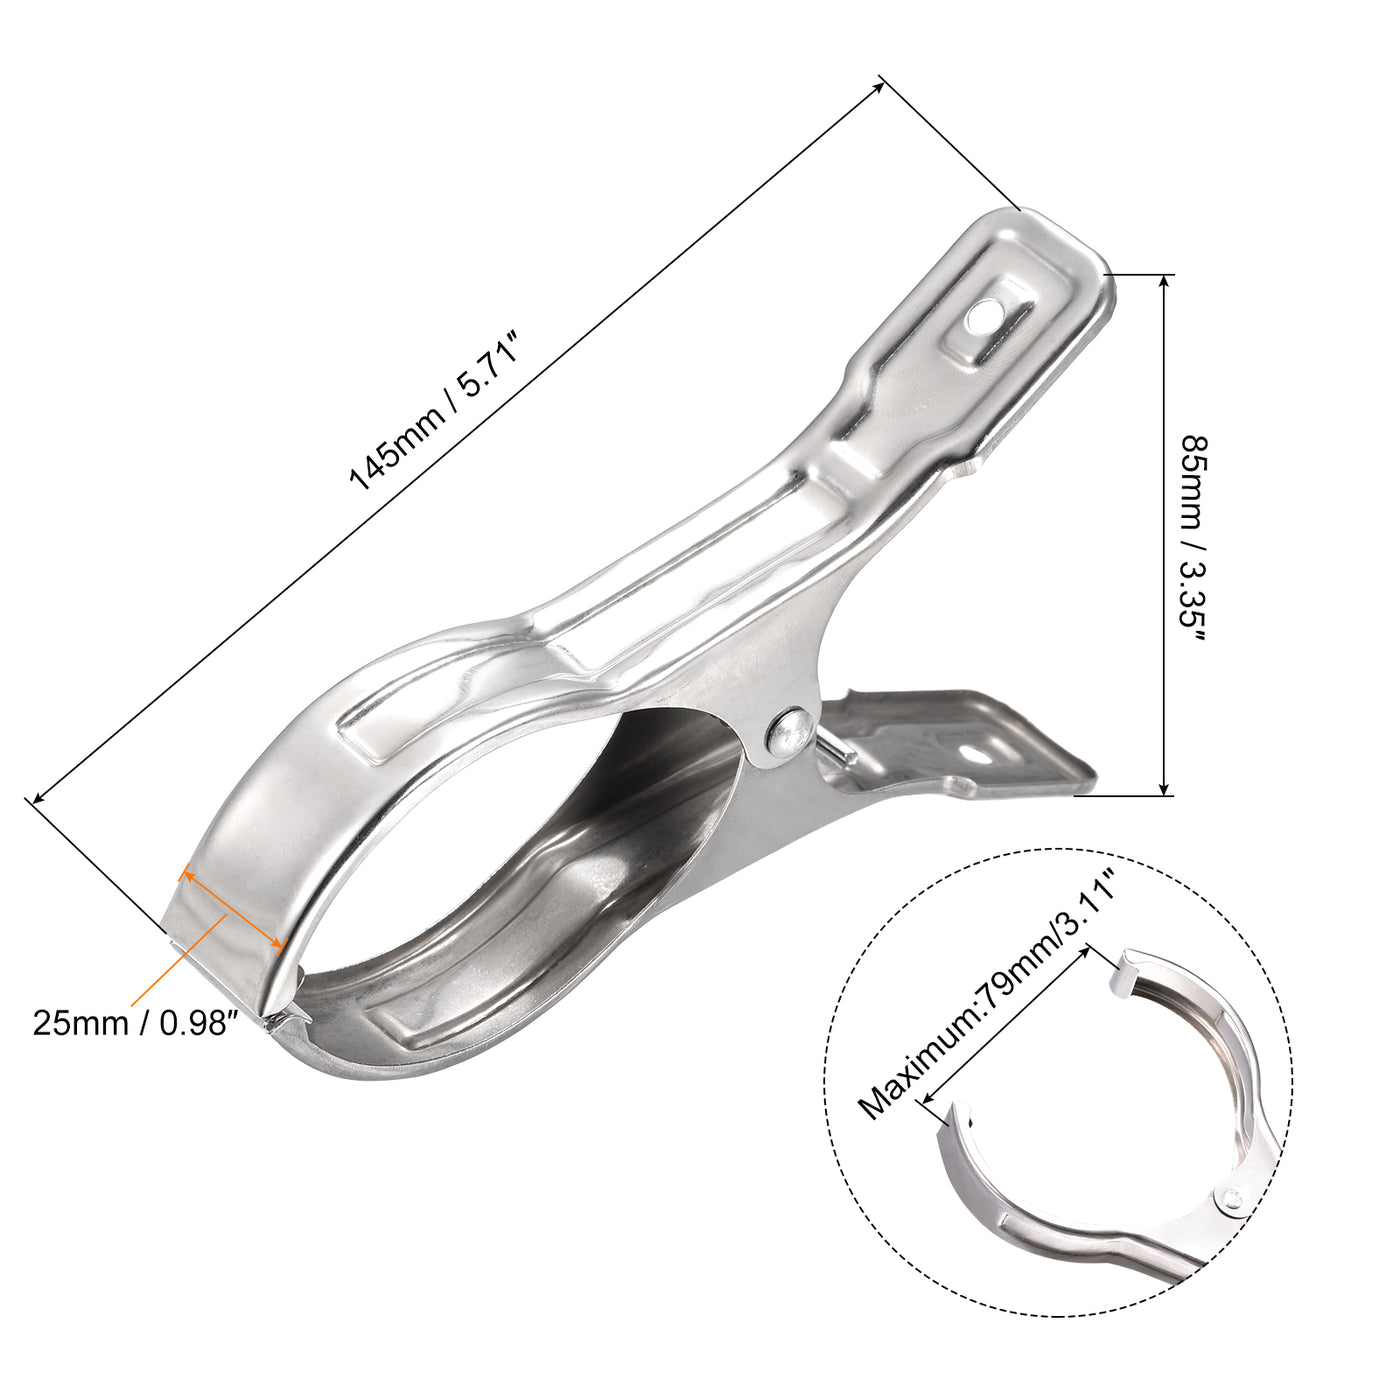 uxcell Uxcell Tablecloth Clips - 145mm Stainless Steel Clamps for Fixing Table Cloth Hanging Clothes, 4 Pcs